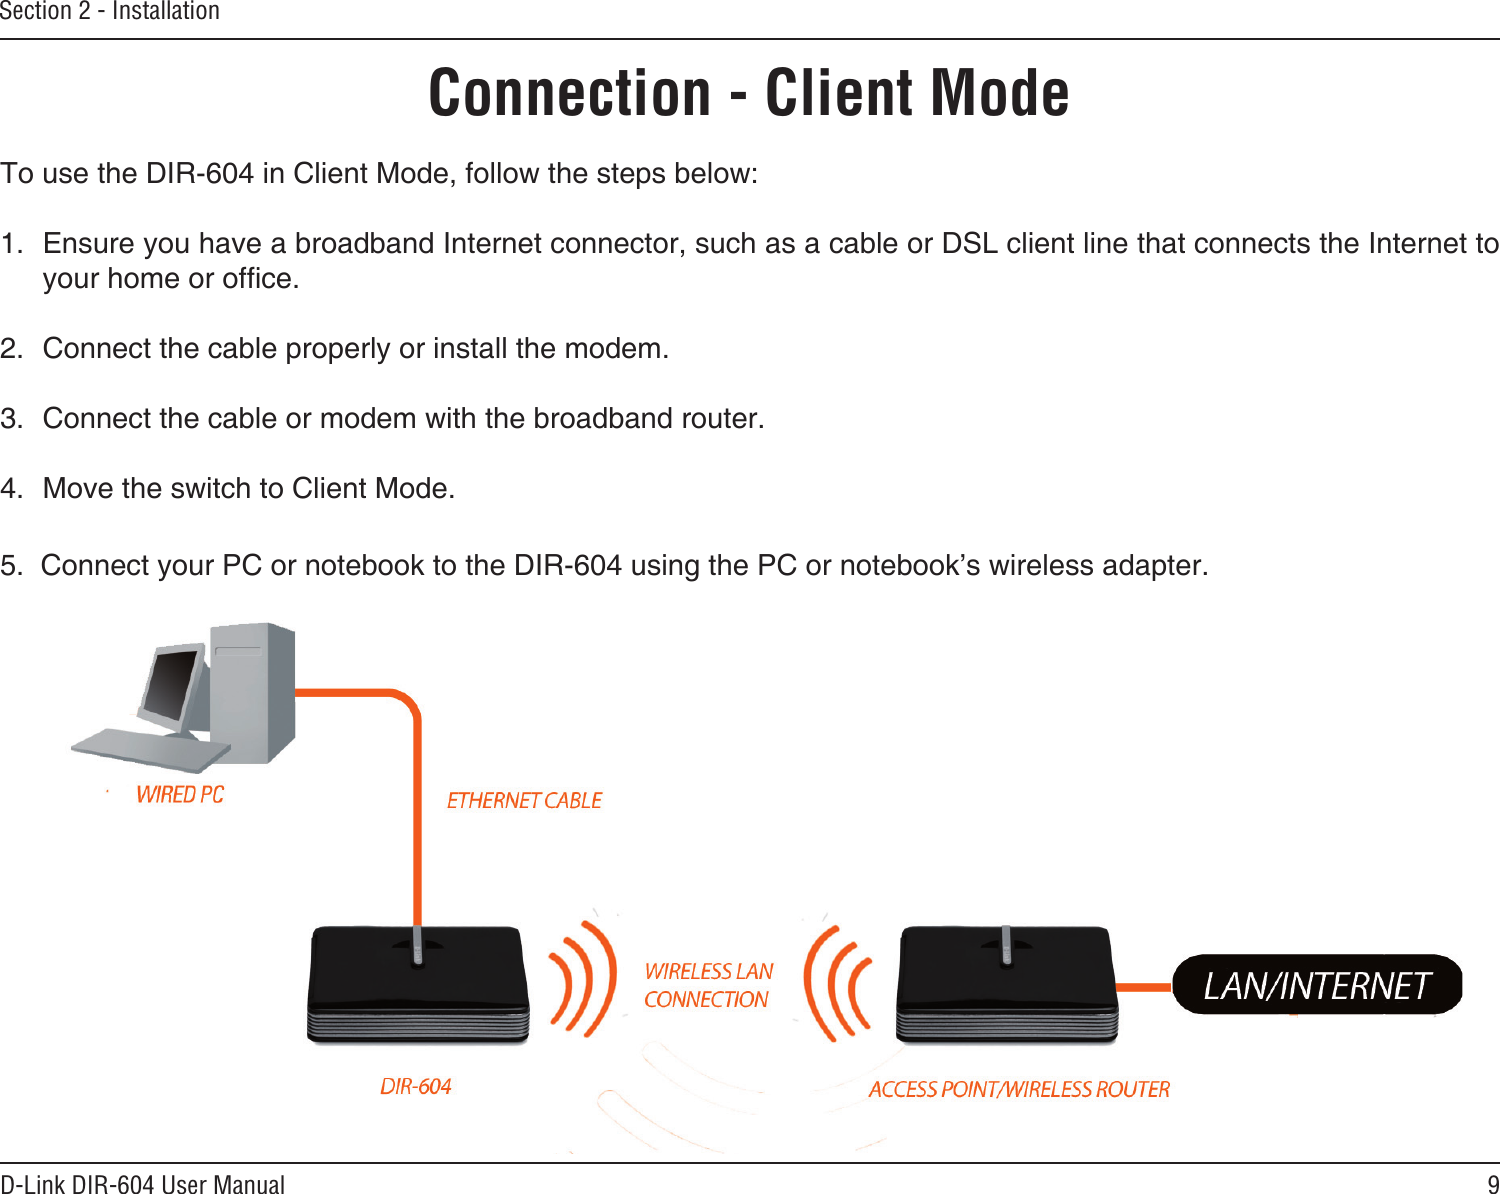 9D-Link DIR-604 User ManualSection 2 - InstallationConnection - Client ModeTo use the DIR-604 in Client Mode, follow the steps below:1.  Ensure you have a broadband Internet connector, such as a cable or DSL client line that connects the Internet to your home or ofce. 2.  Connect the cable properly or install the modem.3.  Connect the cable or modem with the broadband router.  4.  Move the switch to Client Mode. 5.  Connect your PC or notebook to the DIR-604 using the PC or notebook’s wireless adapter.